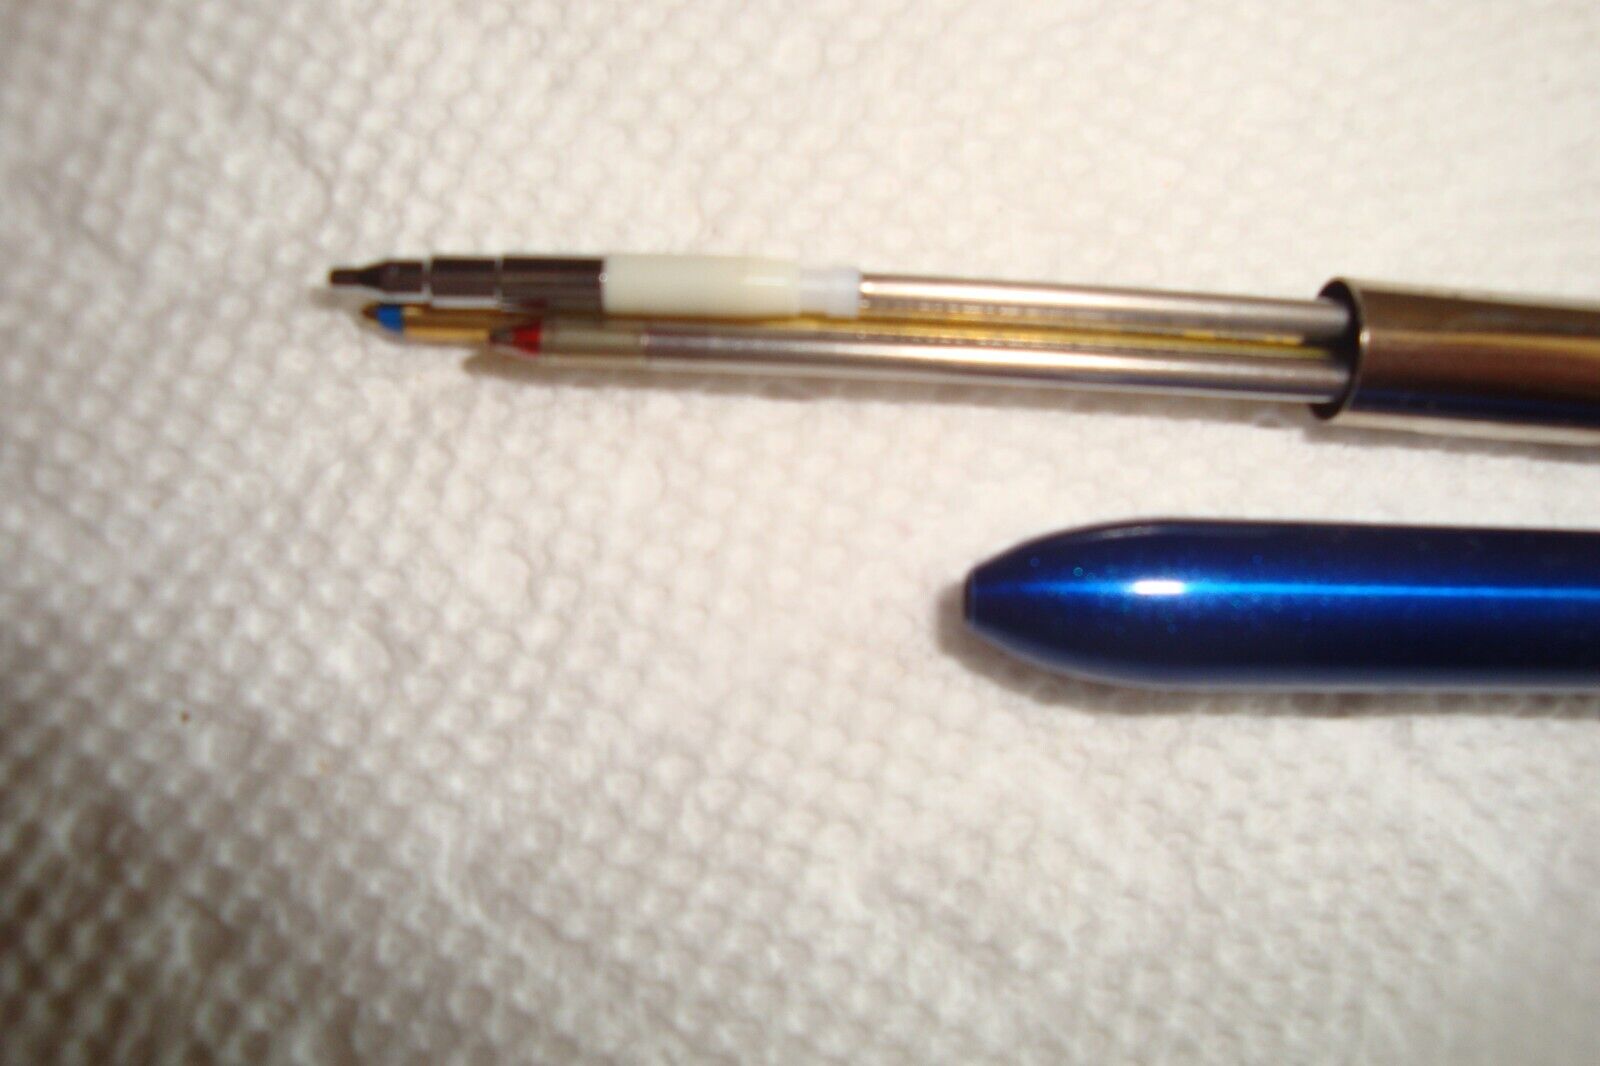 Parker Insignia Three-in-One Ball Point Pen. - Metallic Blue